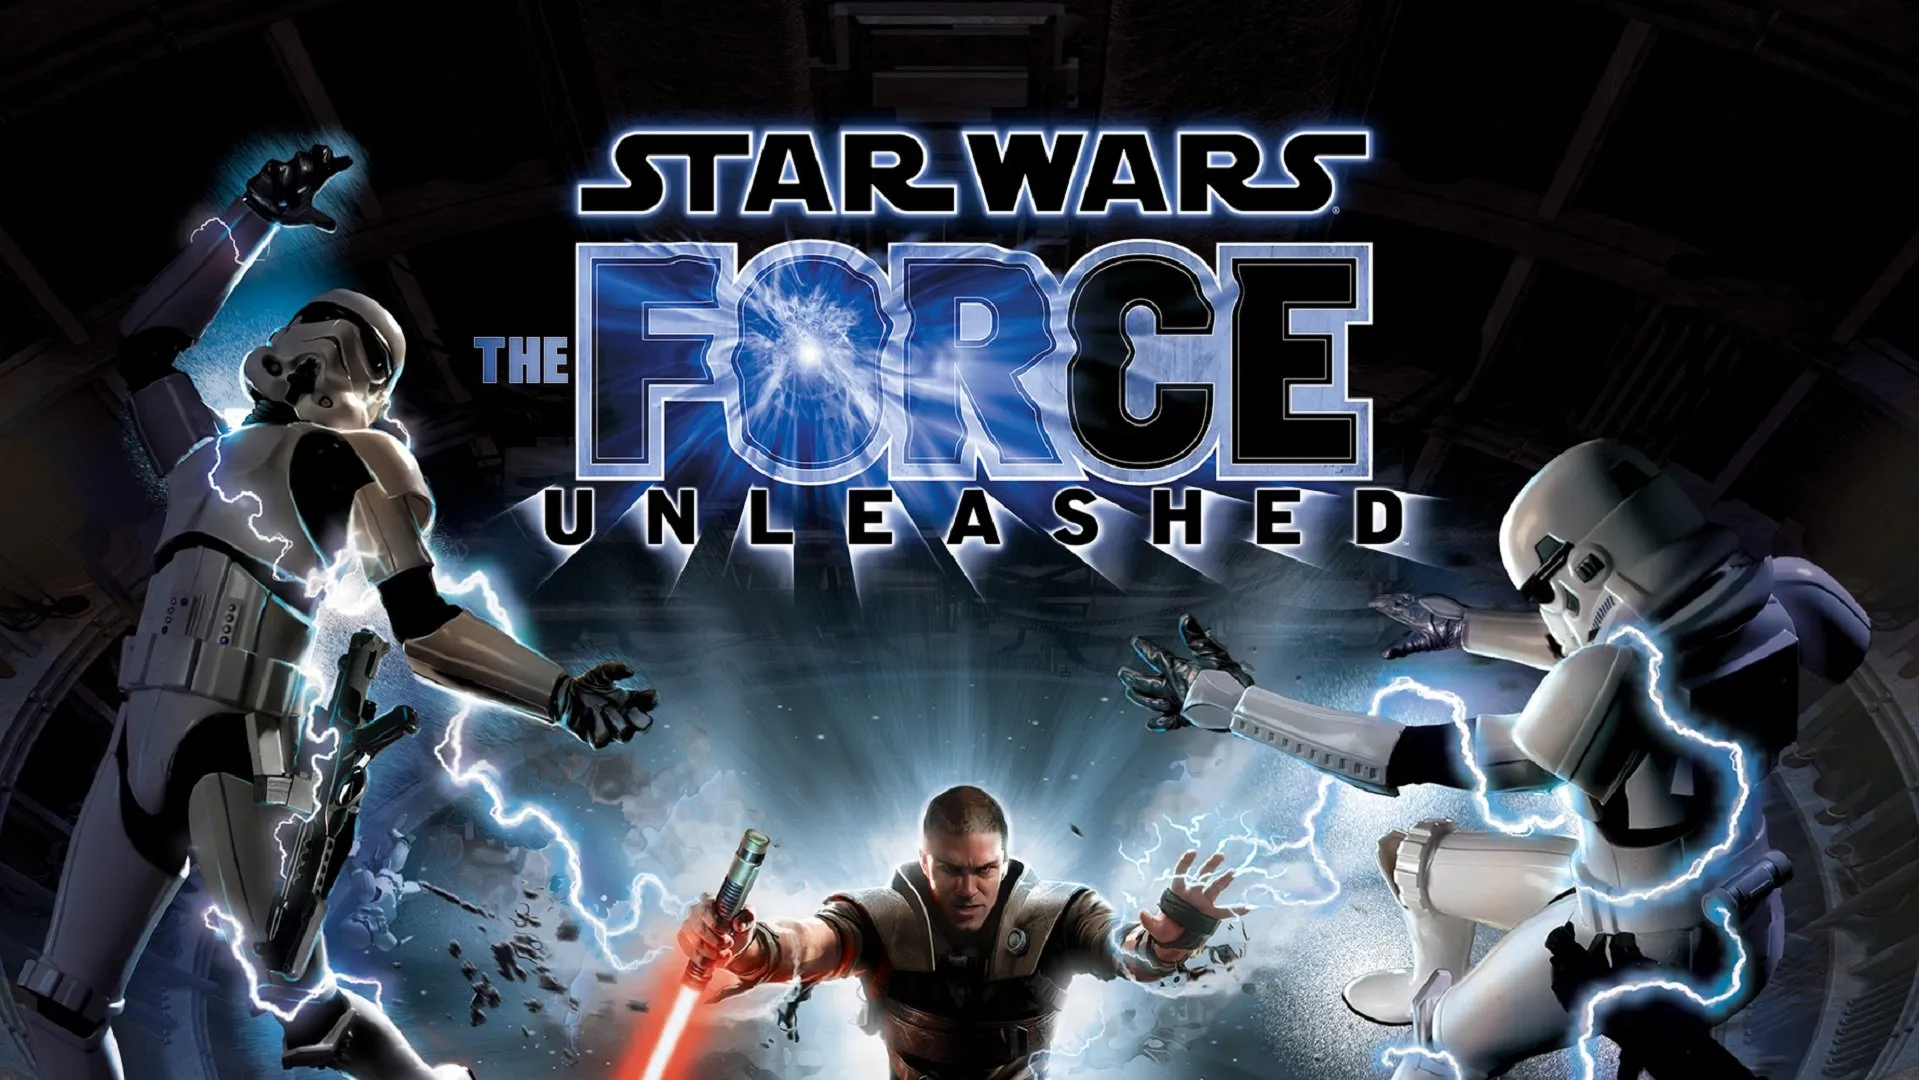 Star Wars The Force Unleashed.